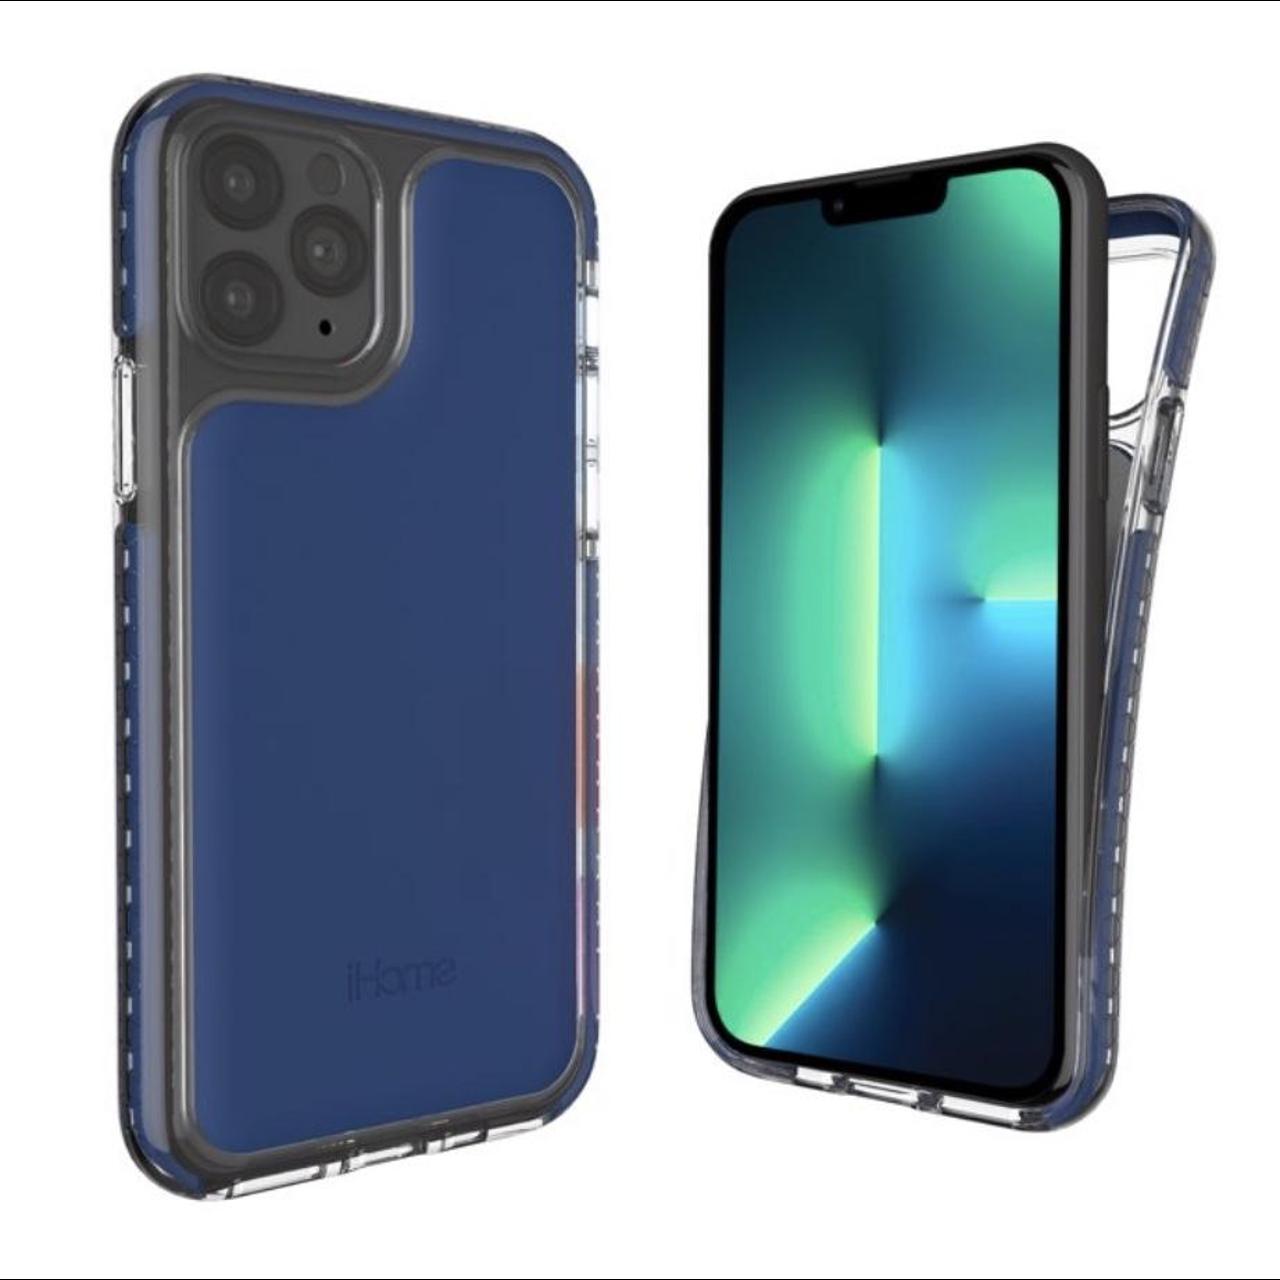 Product Image 4 - iPhone 13 pro case
Opened but